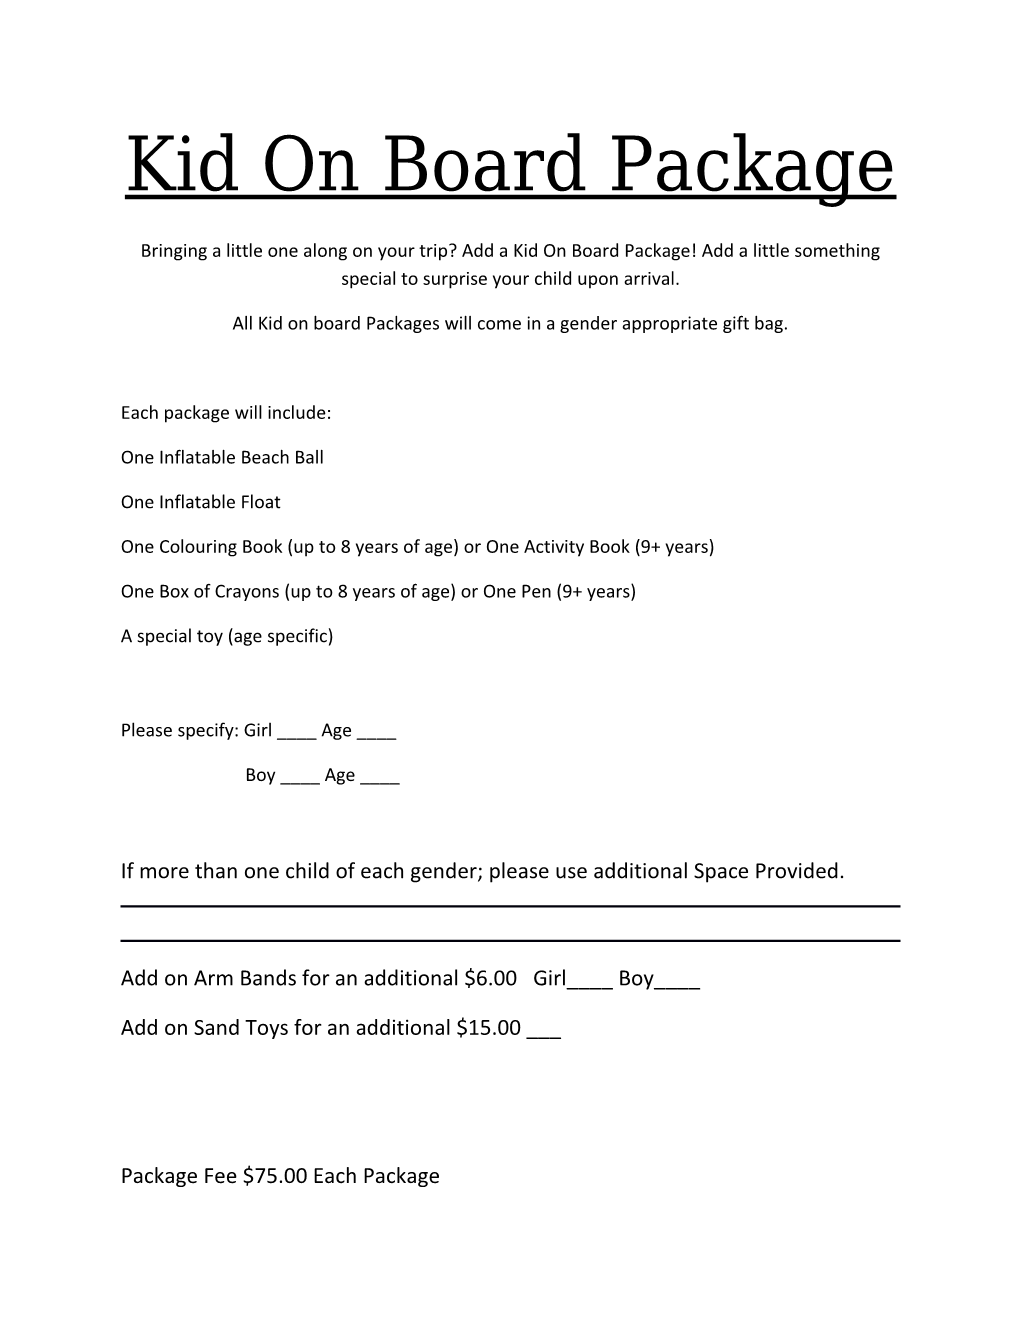 All Kid on Board Packages Will Come in a Gender Appropriate Gift Bag